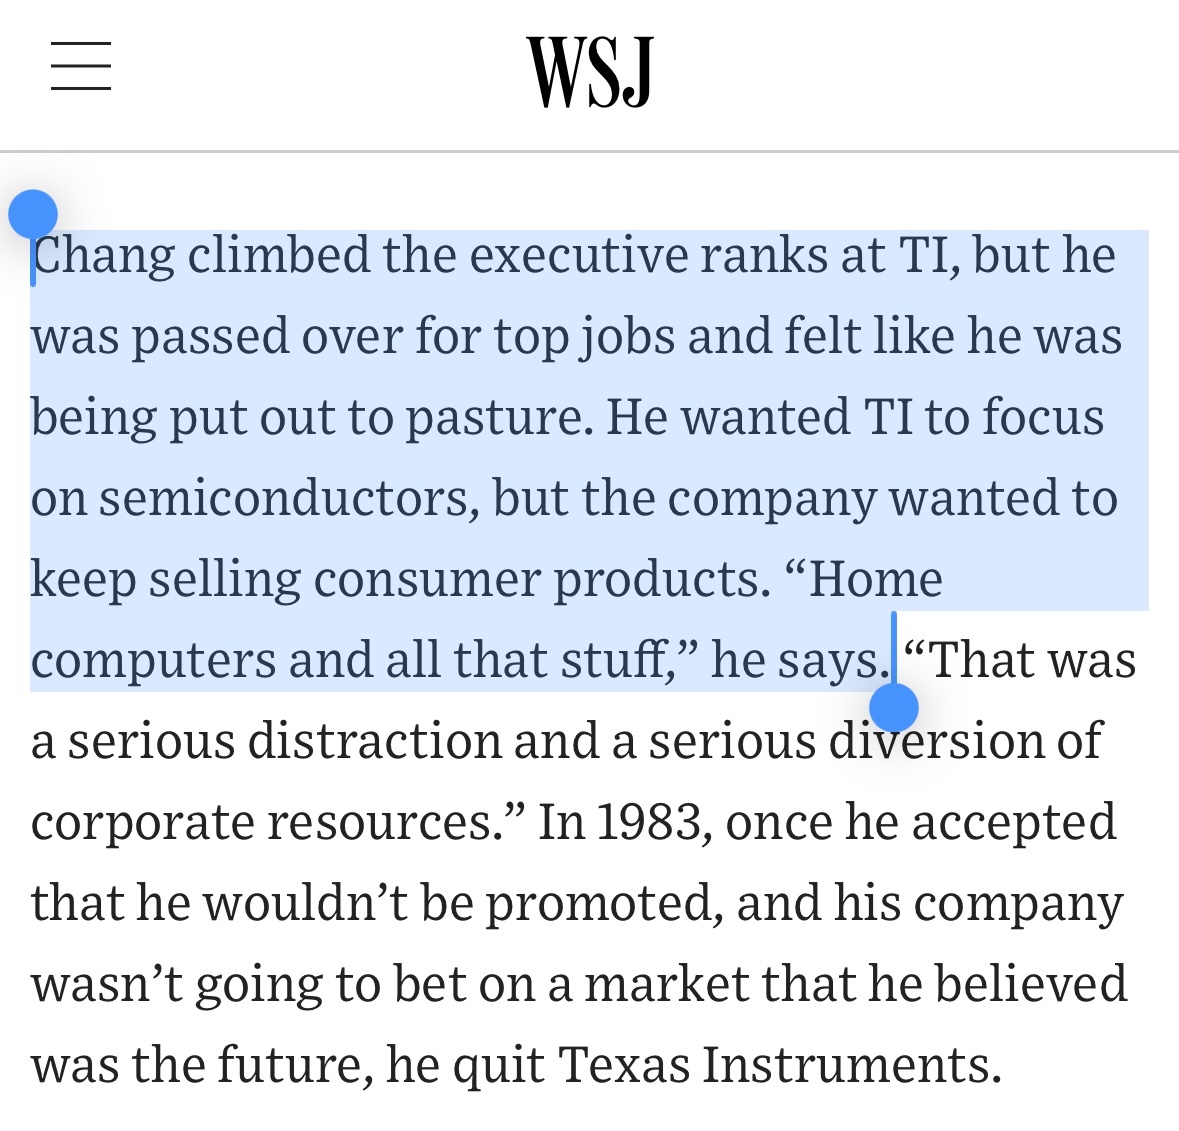 Imagine if Morris Chang took over Texas Instruments in 1983 instead of leaving for Taiwan to start TSMC. Whole different world…